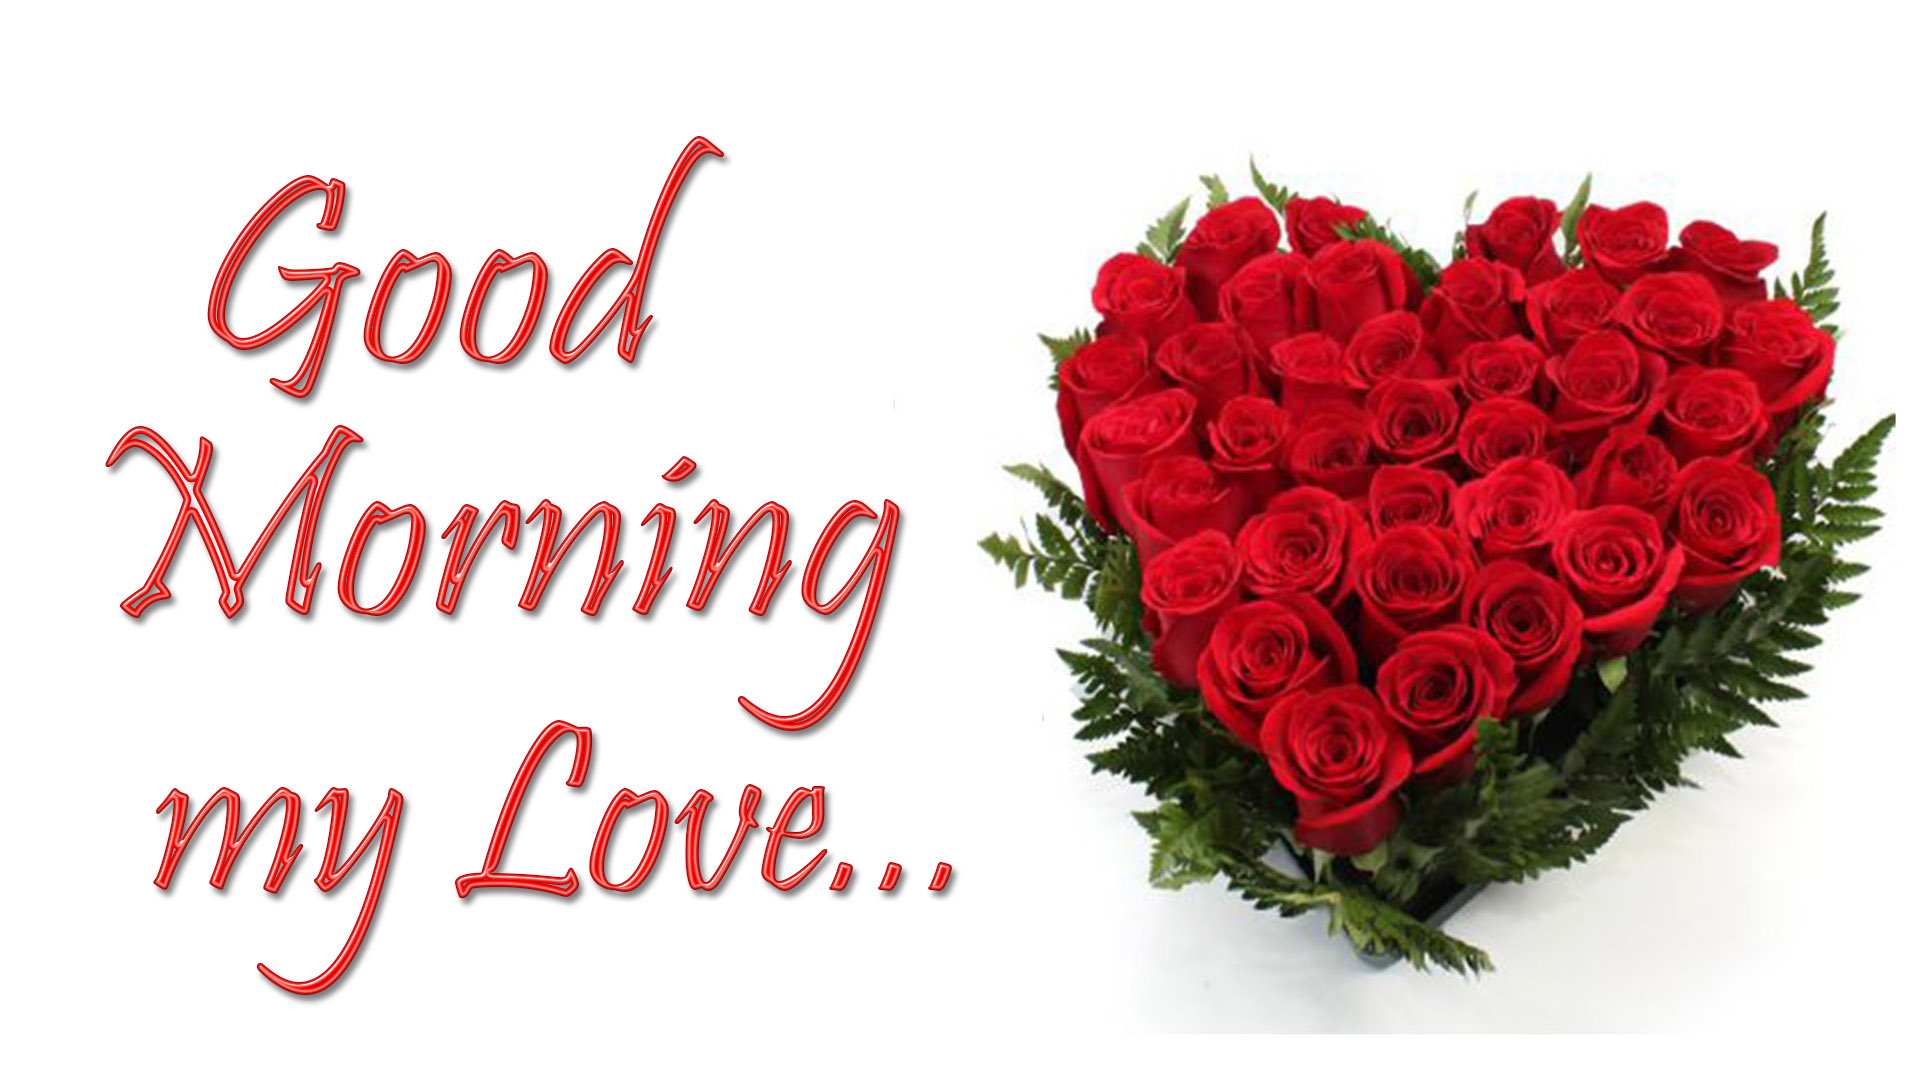 Good Morning My Love Images & Animated Pictures With Greetings & Me...